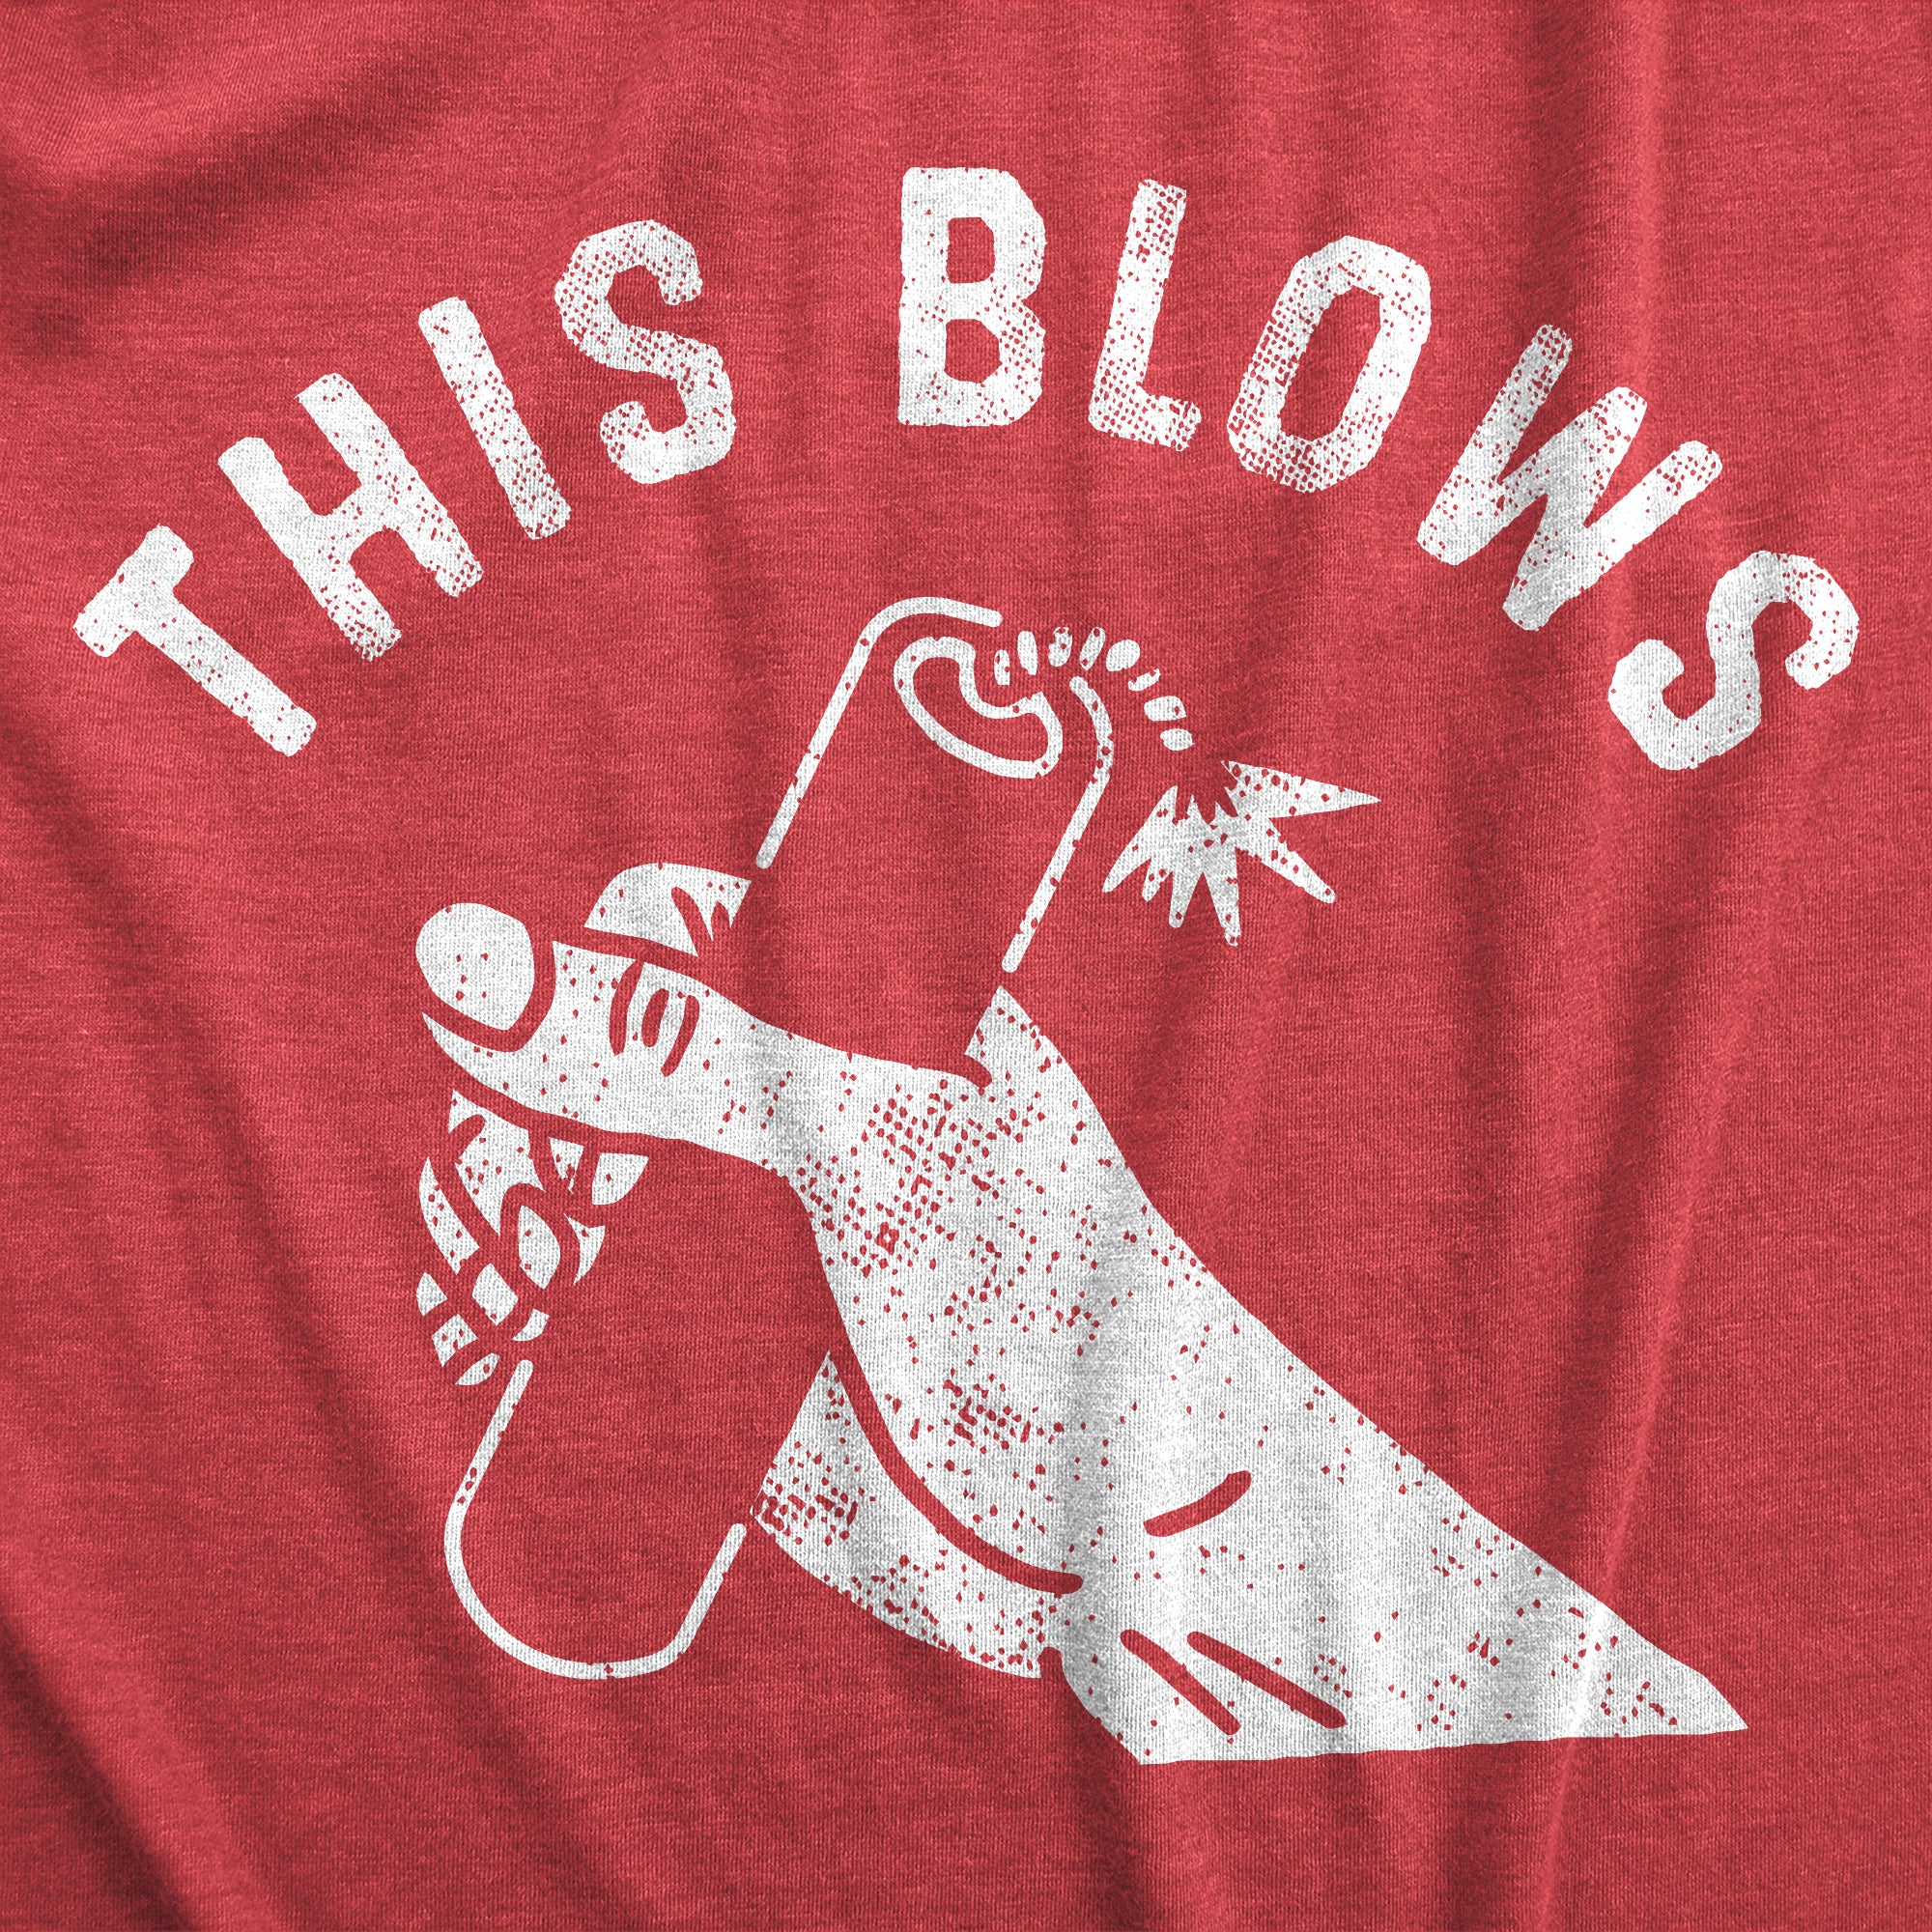 Funny Heather Red - BLOWS This Blows Mens T Shirt Nerdy Fourth of July Sarcastic Tee